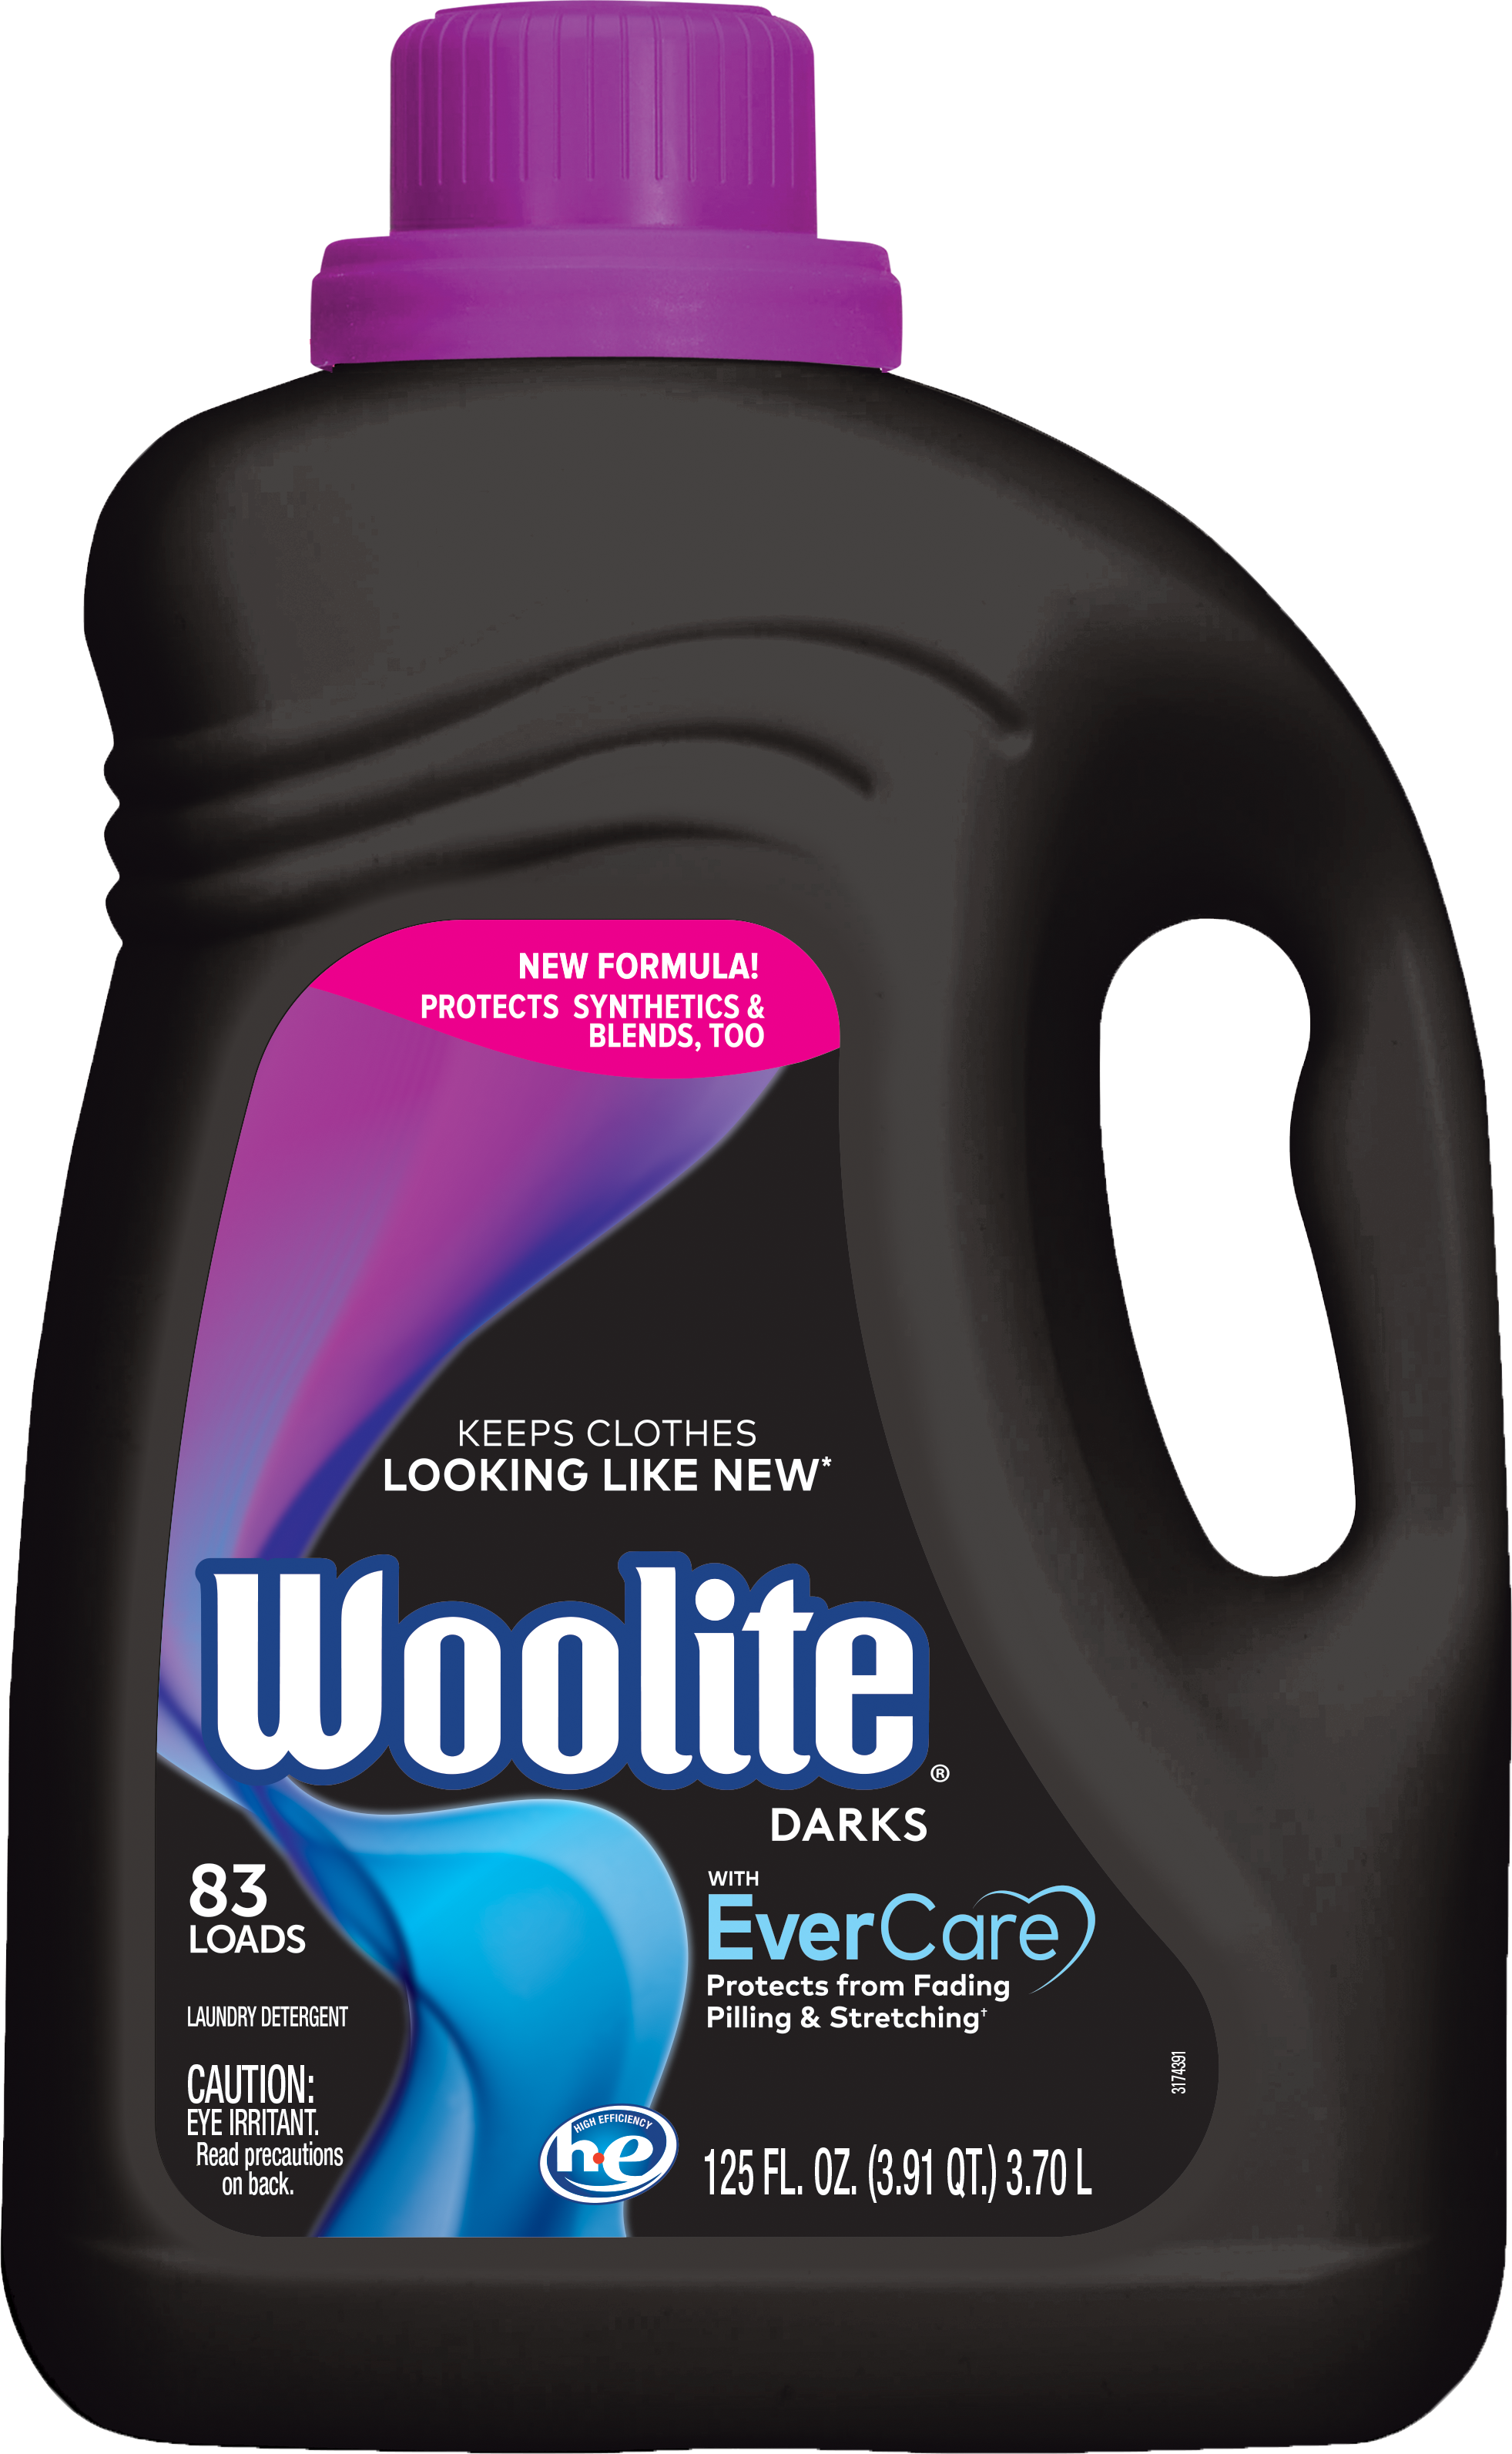 Woolite All DARKS Liquid Laundry Detergent, Midnight Breeze Scent, 83 Loads, 125oz, Regular & HE Washers, Dark & Black Clothes & Jeans, Packaging May Vary - image 1 of 6